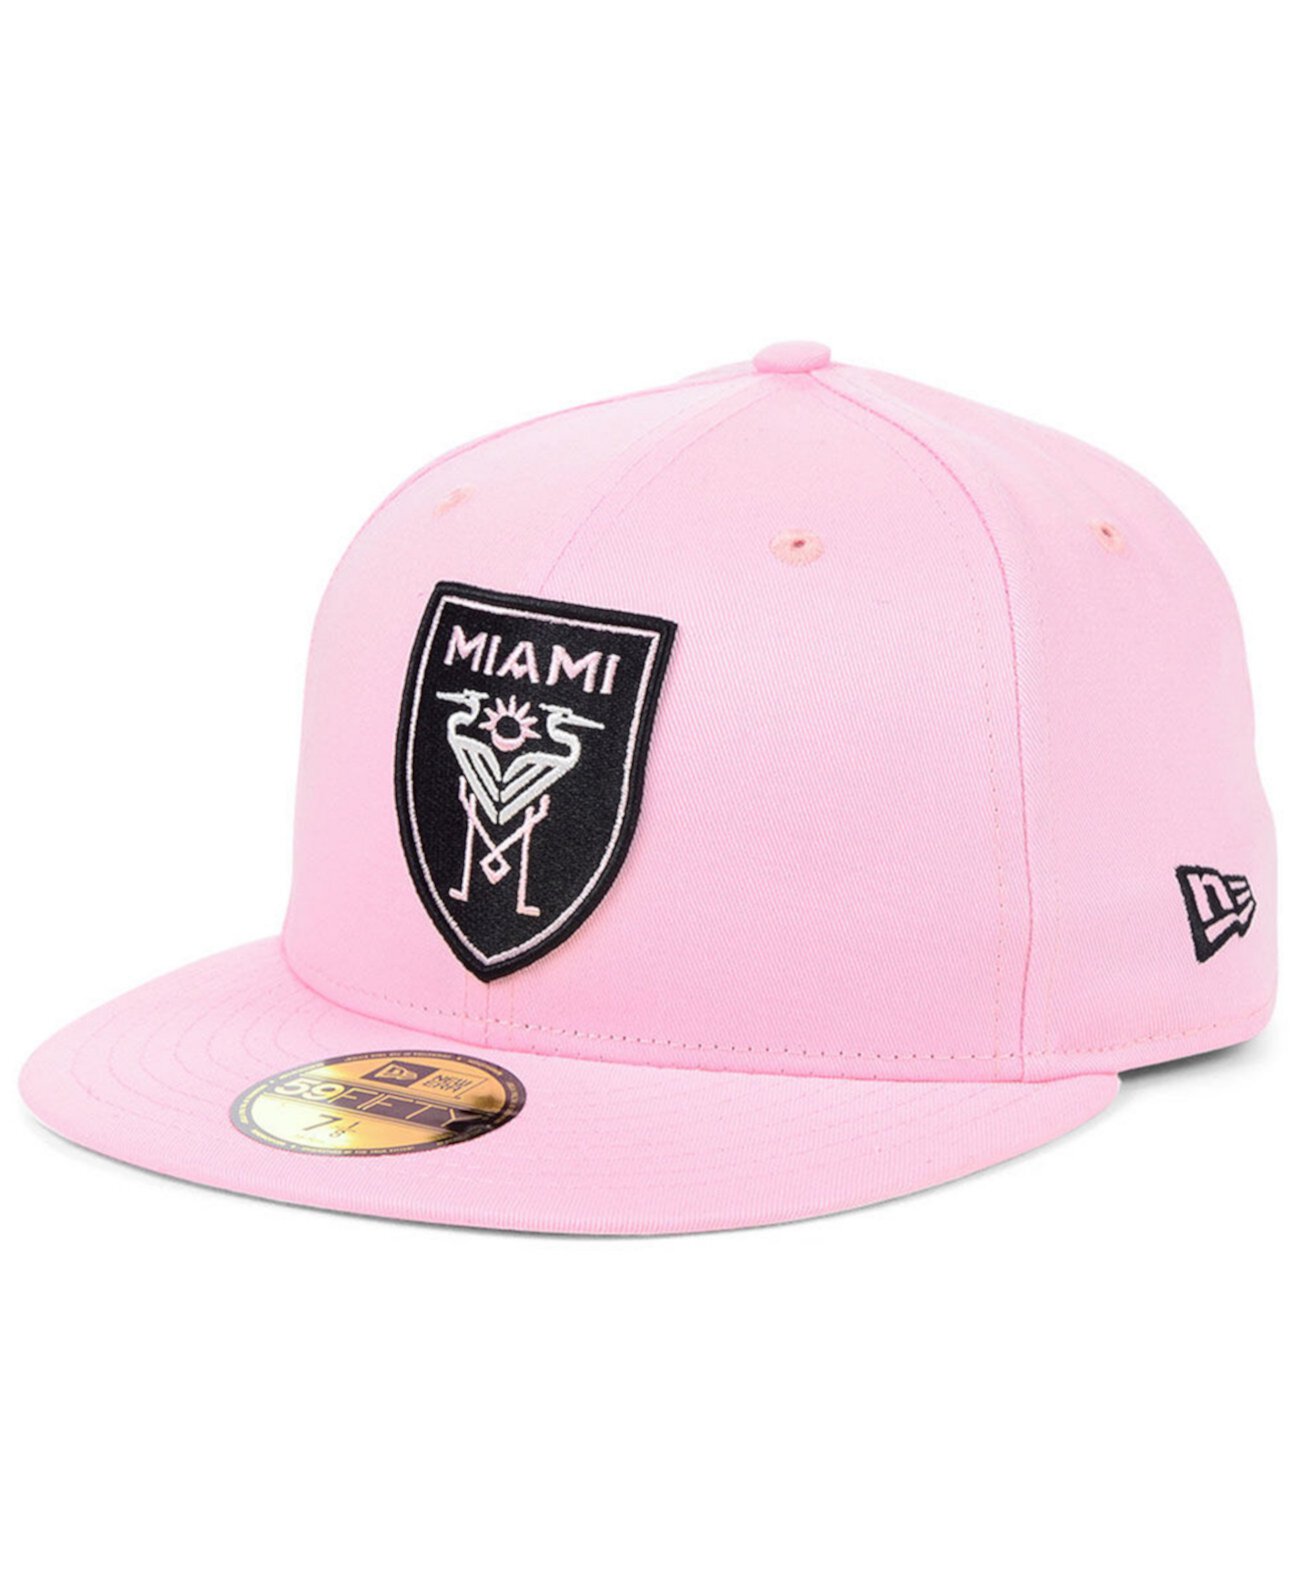 Cap pink fitted Pink Bottom